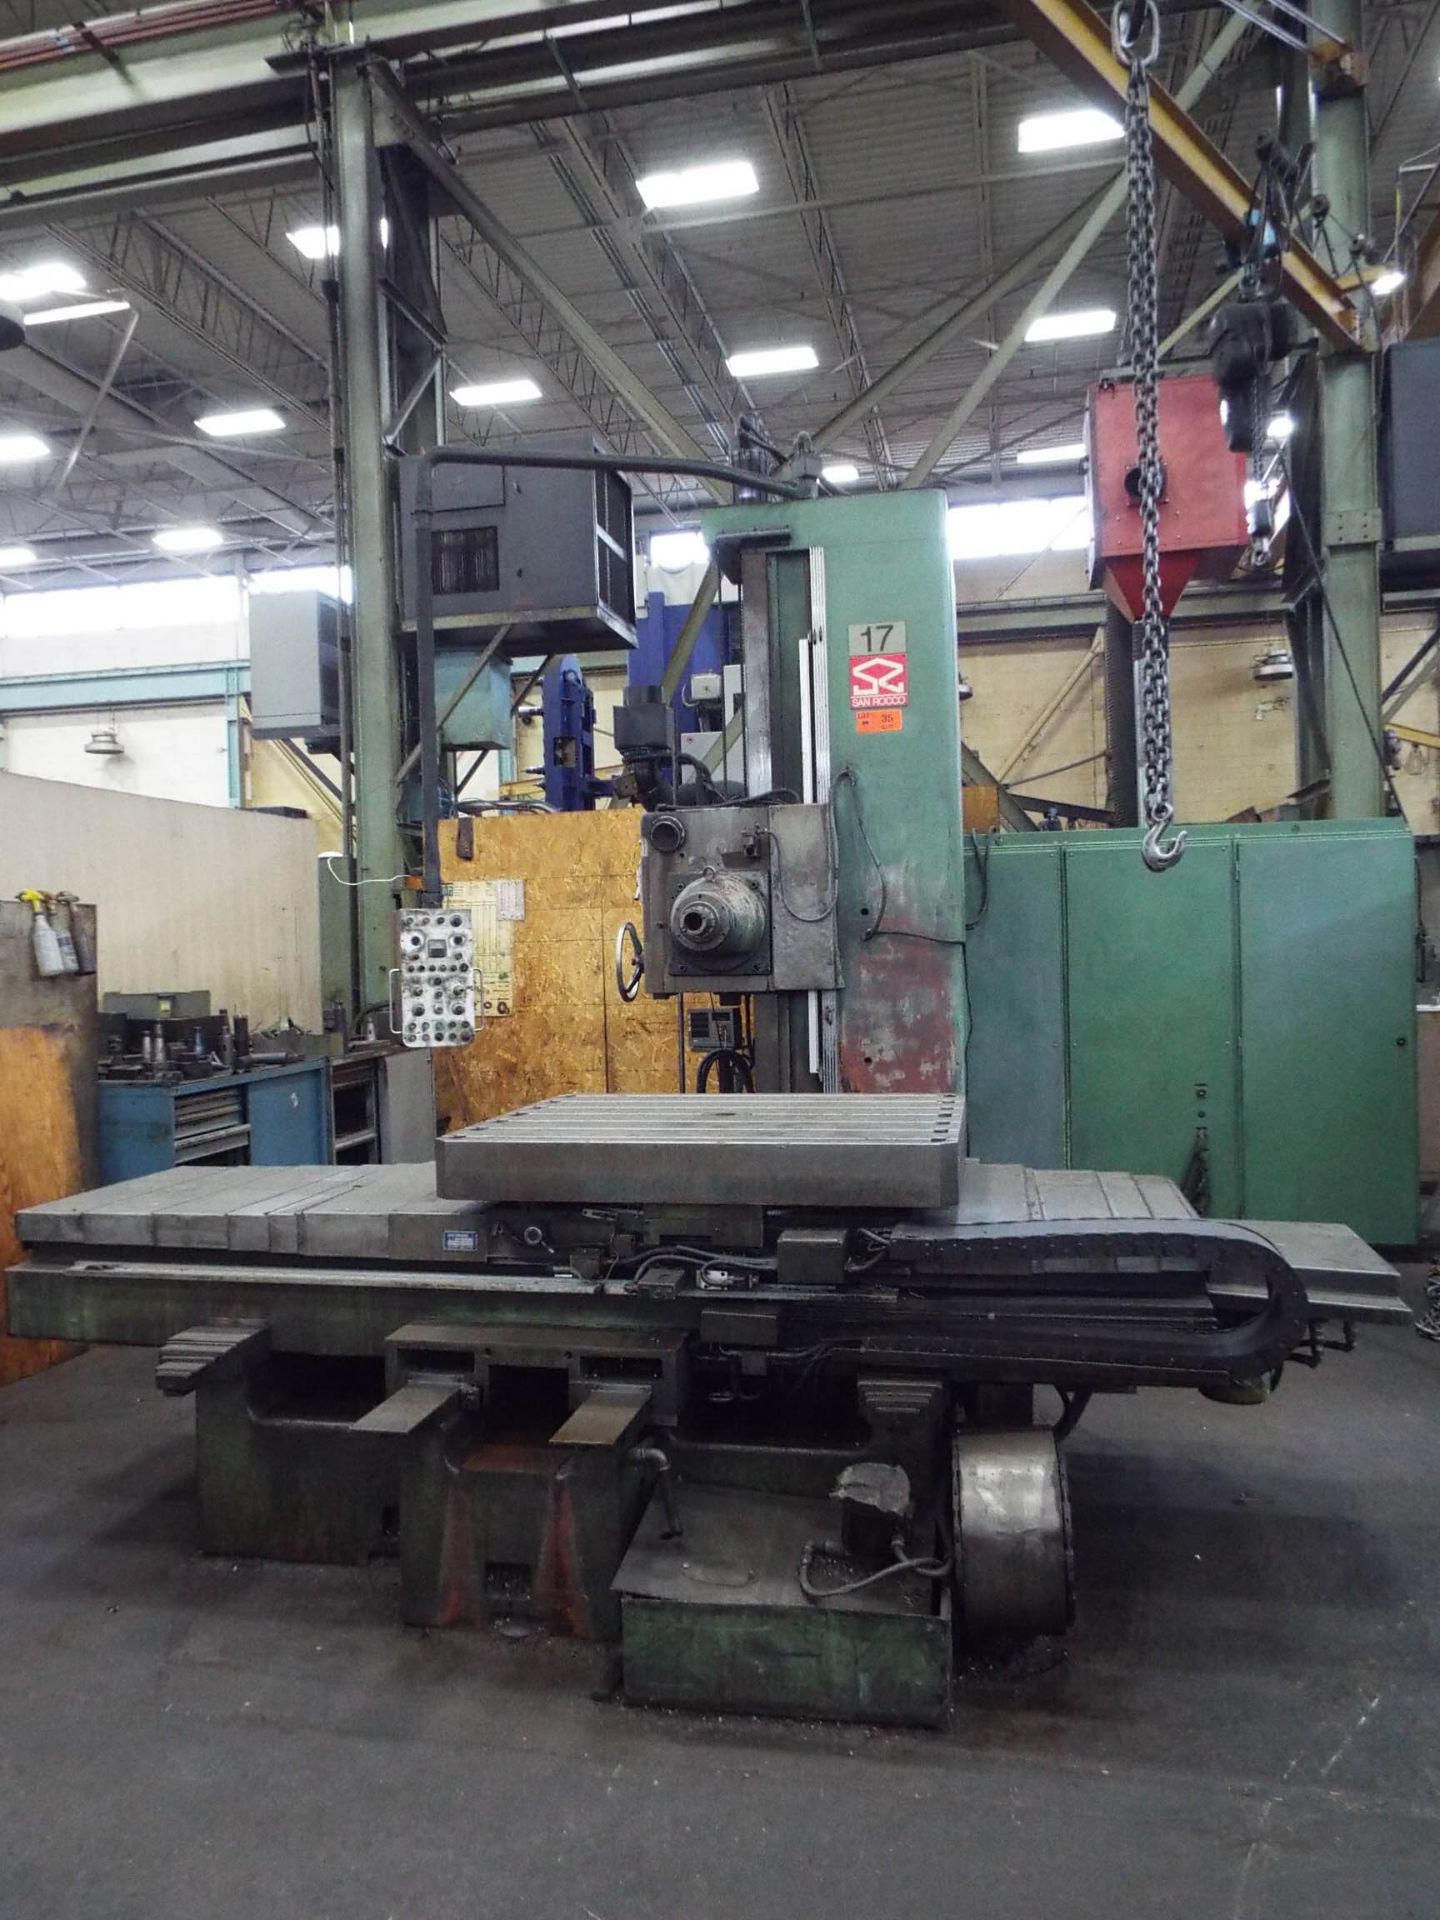 SAN ROCCO FUTURA 10 TABLE-TYPE HORIZONTAL BORING MILL WITH 4" SPINDLE, 51"X43" ROTARY TABLE, 48" - Image 2 of 16